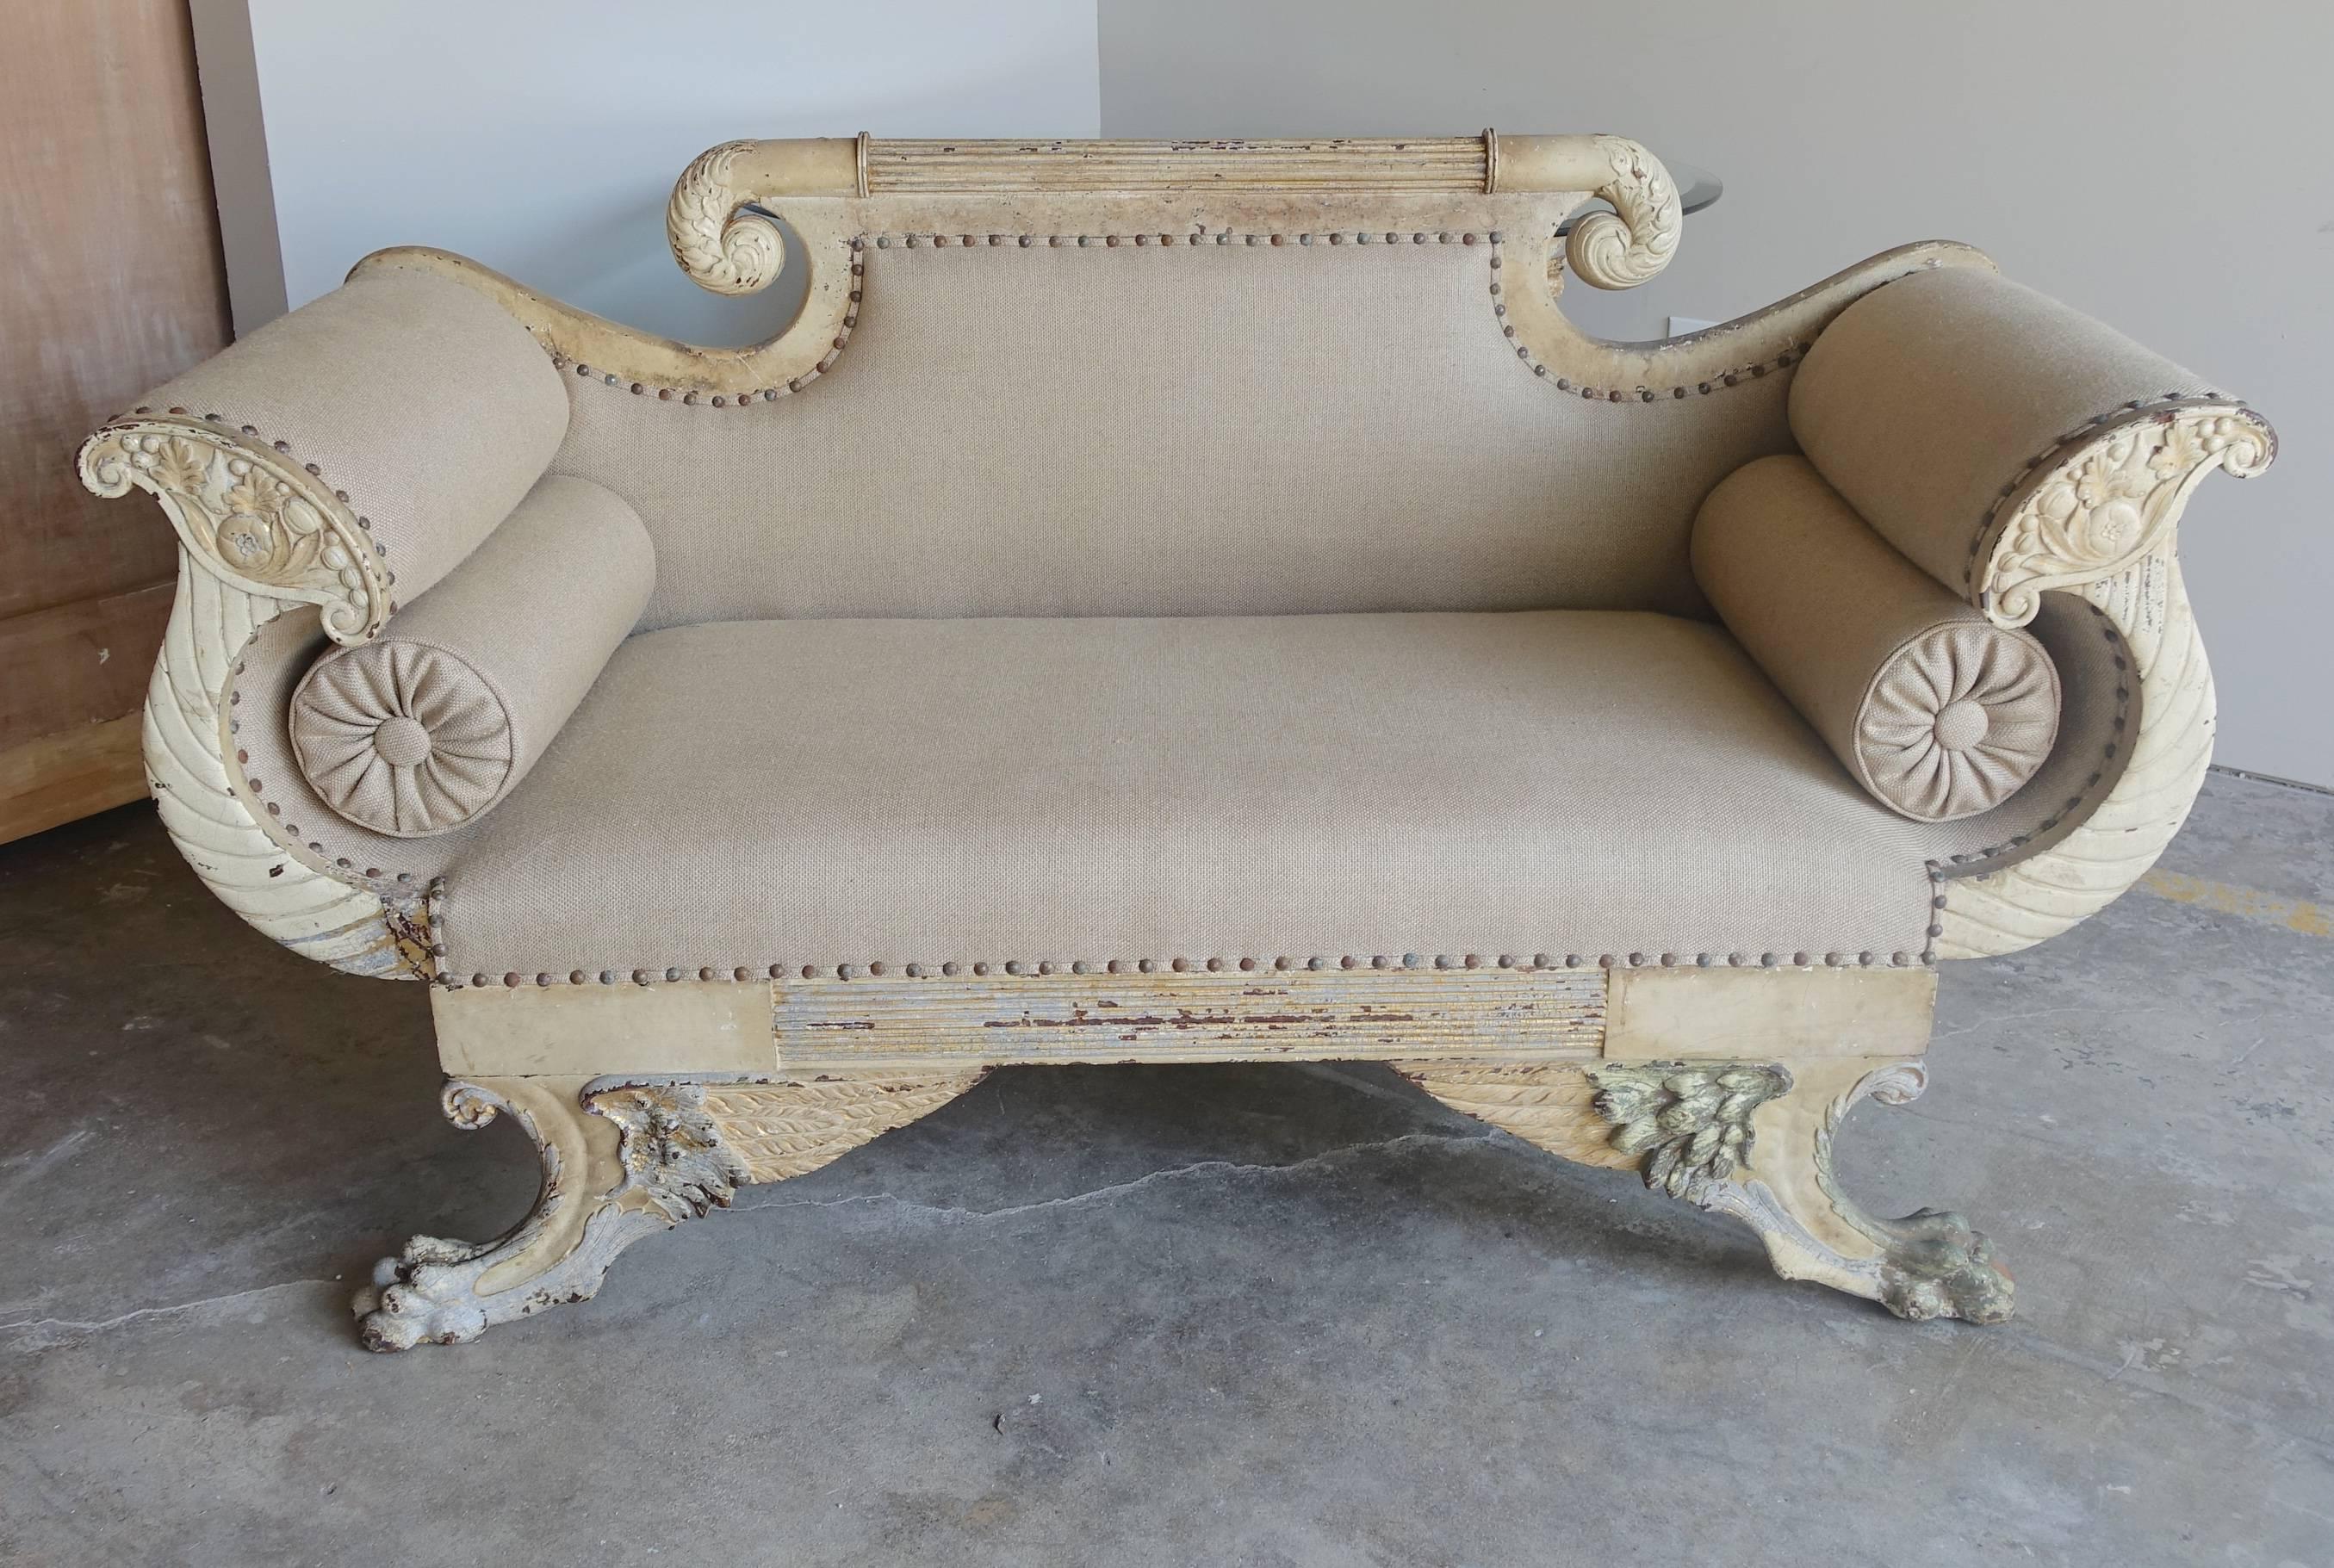 19th century Italian painted settee with two bolsters tucked under a pair of carved cornucopias. The settee stands on four winged lion's paw feet. Newly upholstered in Belgium Linen with spaced nailhead trim detail.